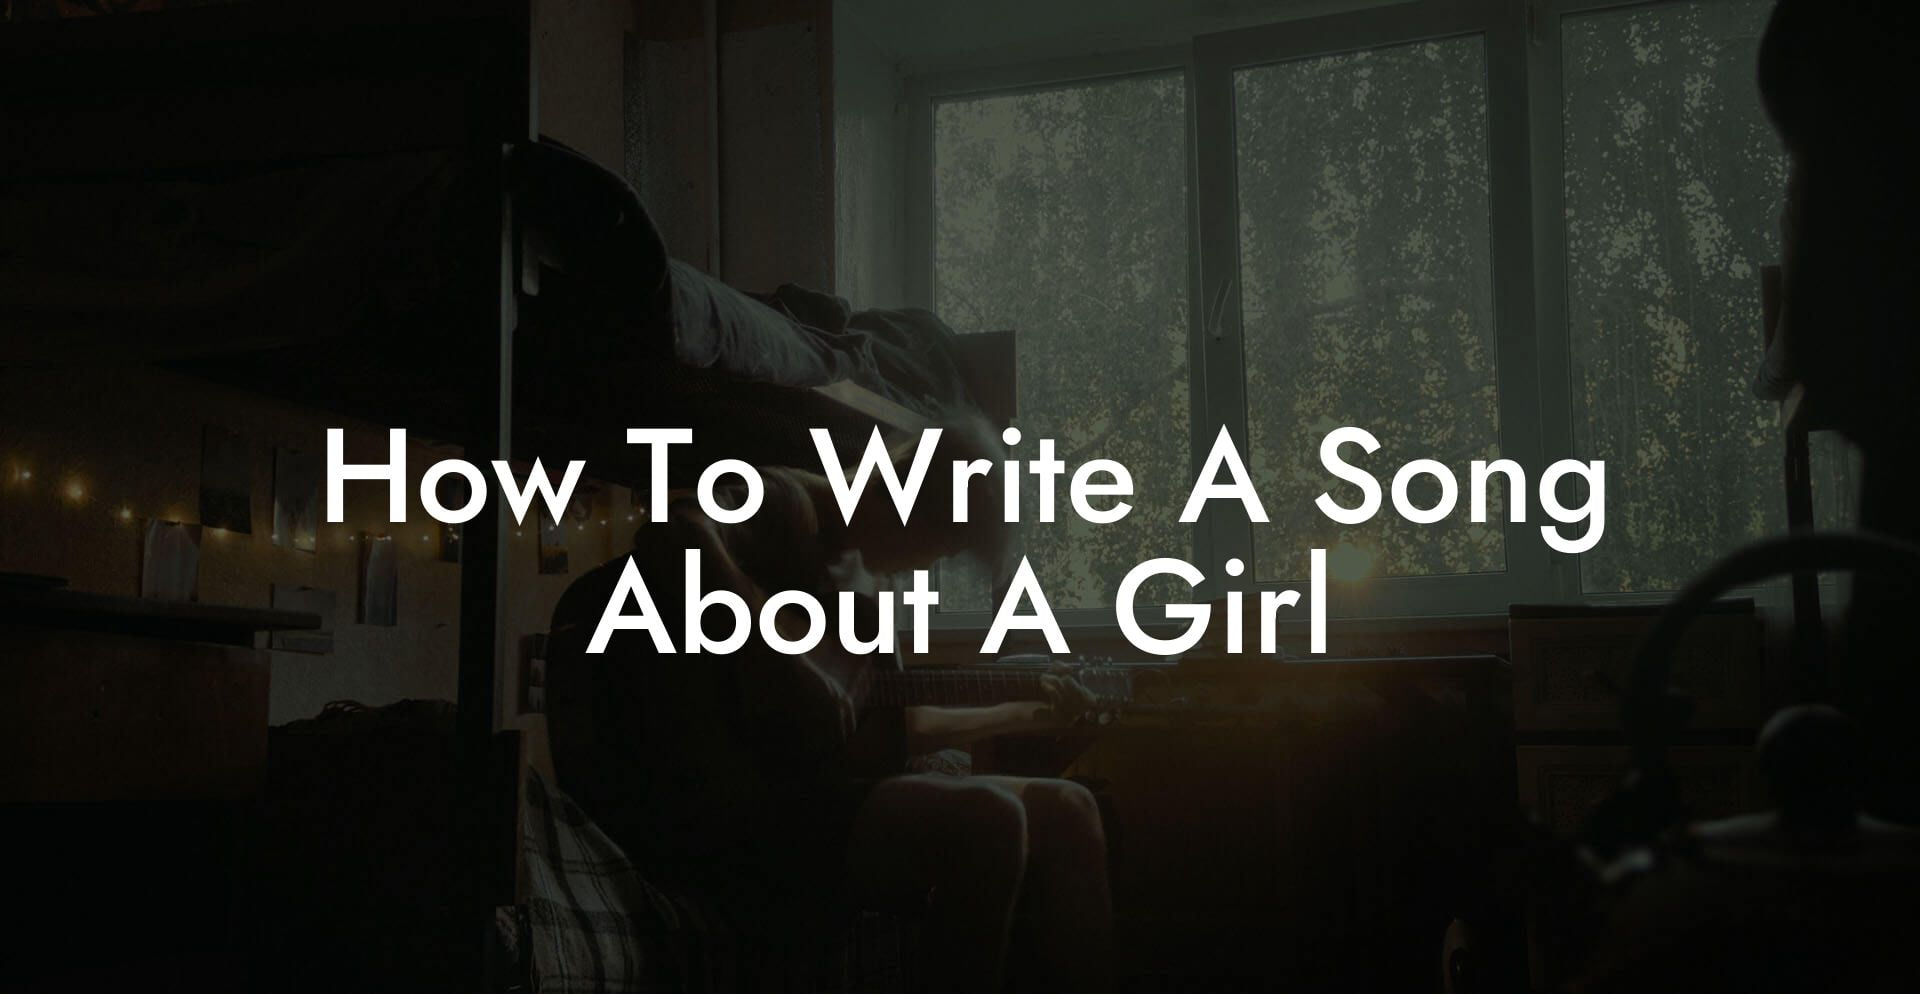 how to write a song about a girl lyric assistant